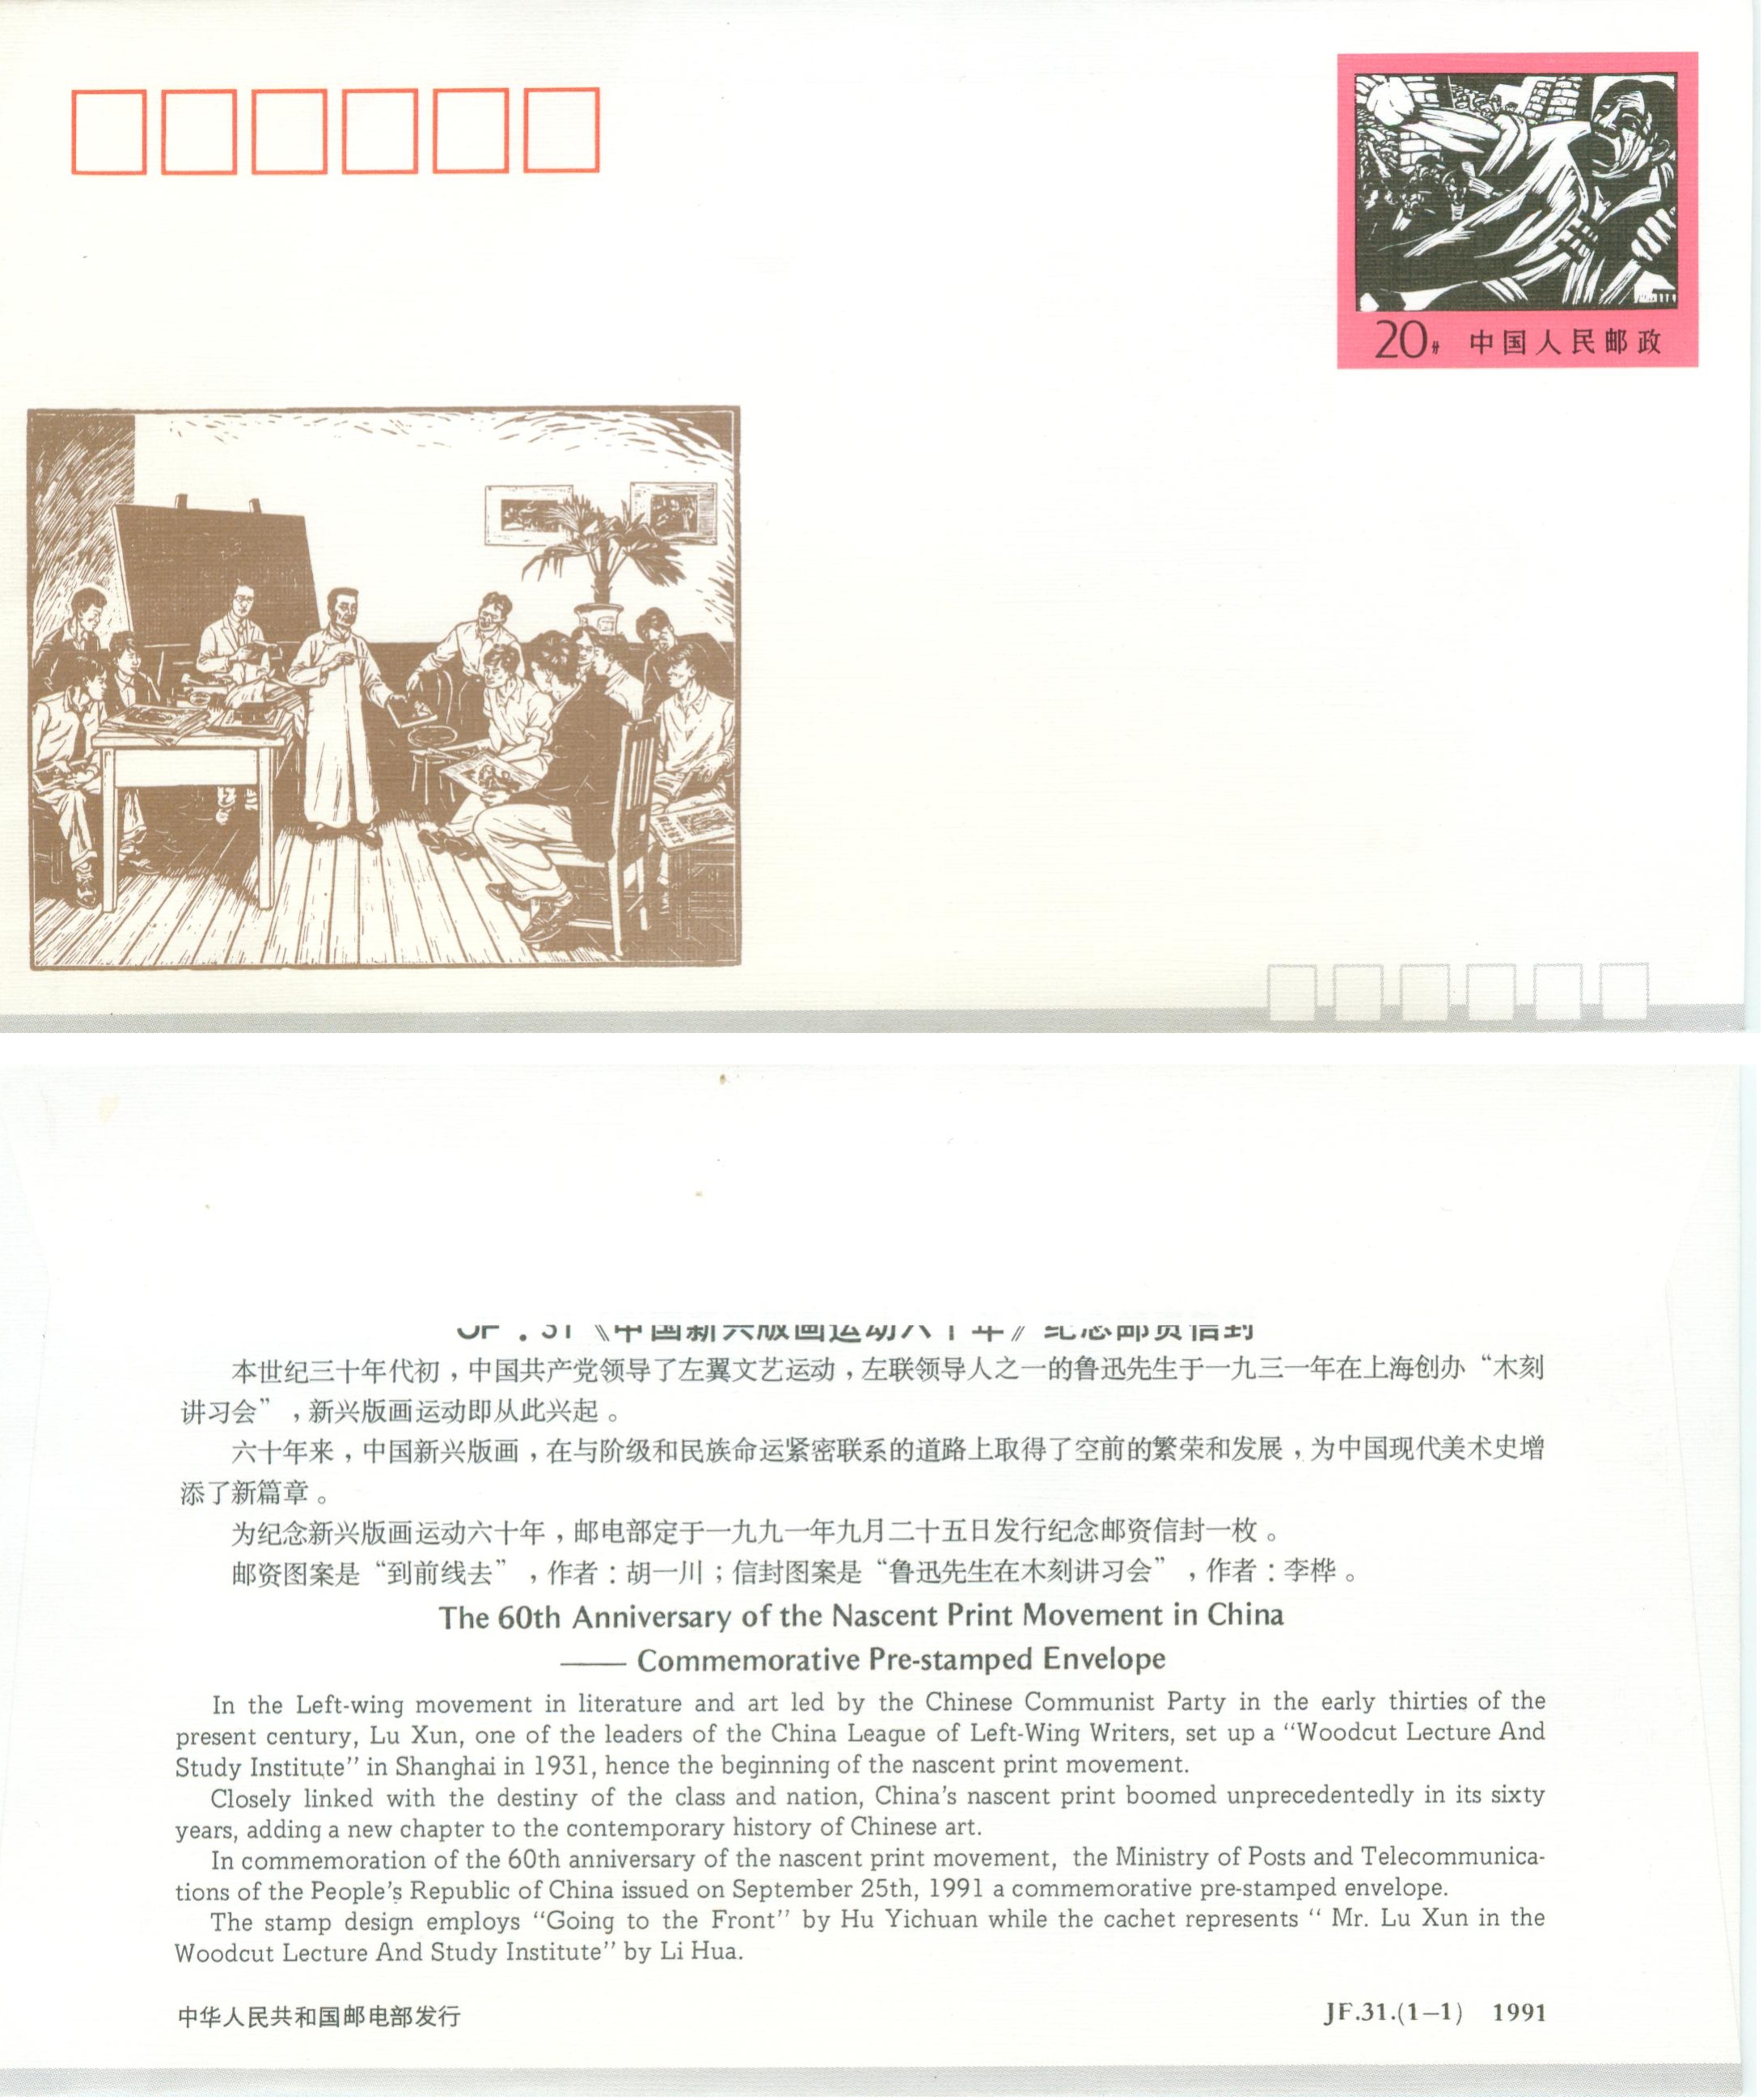 JF31, The 60th Anniversary of the Nascent Print Movement in China 1991